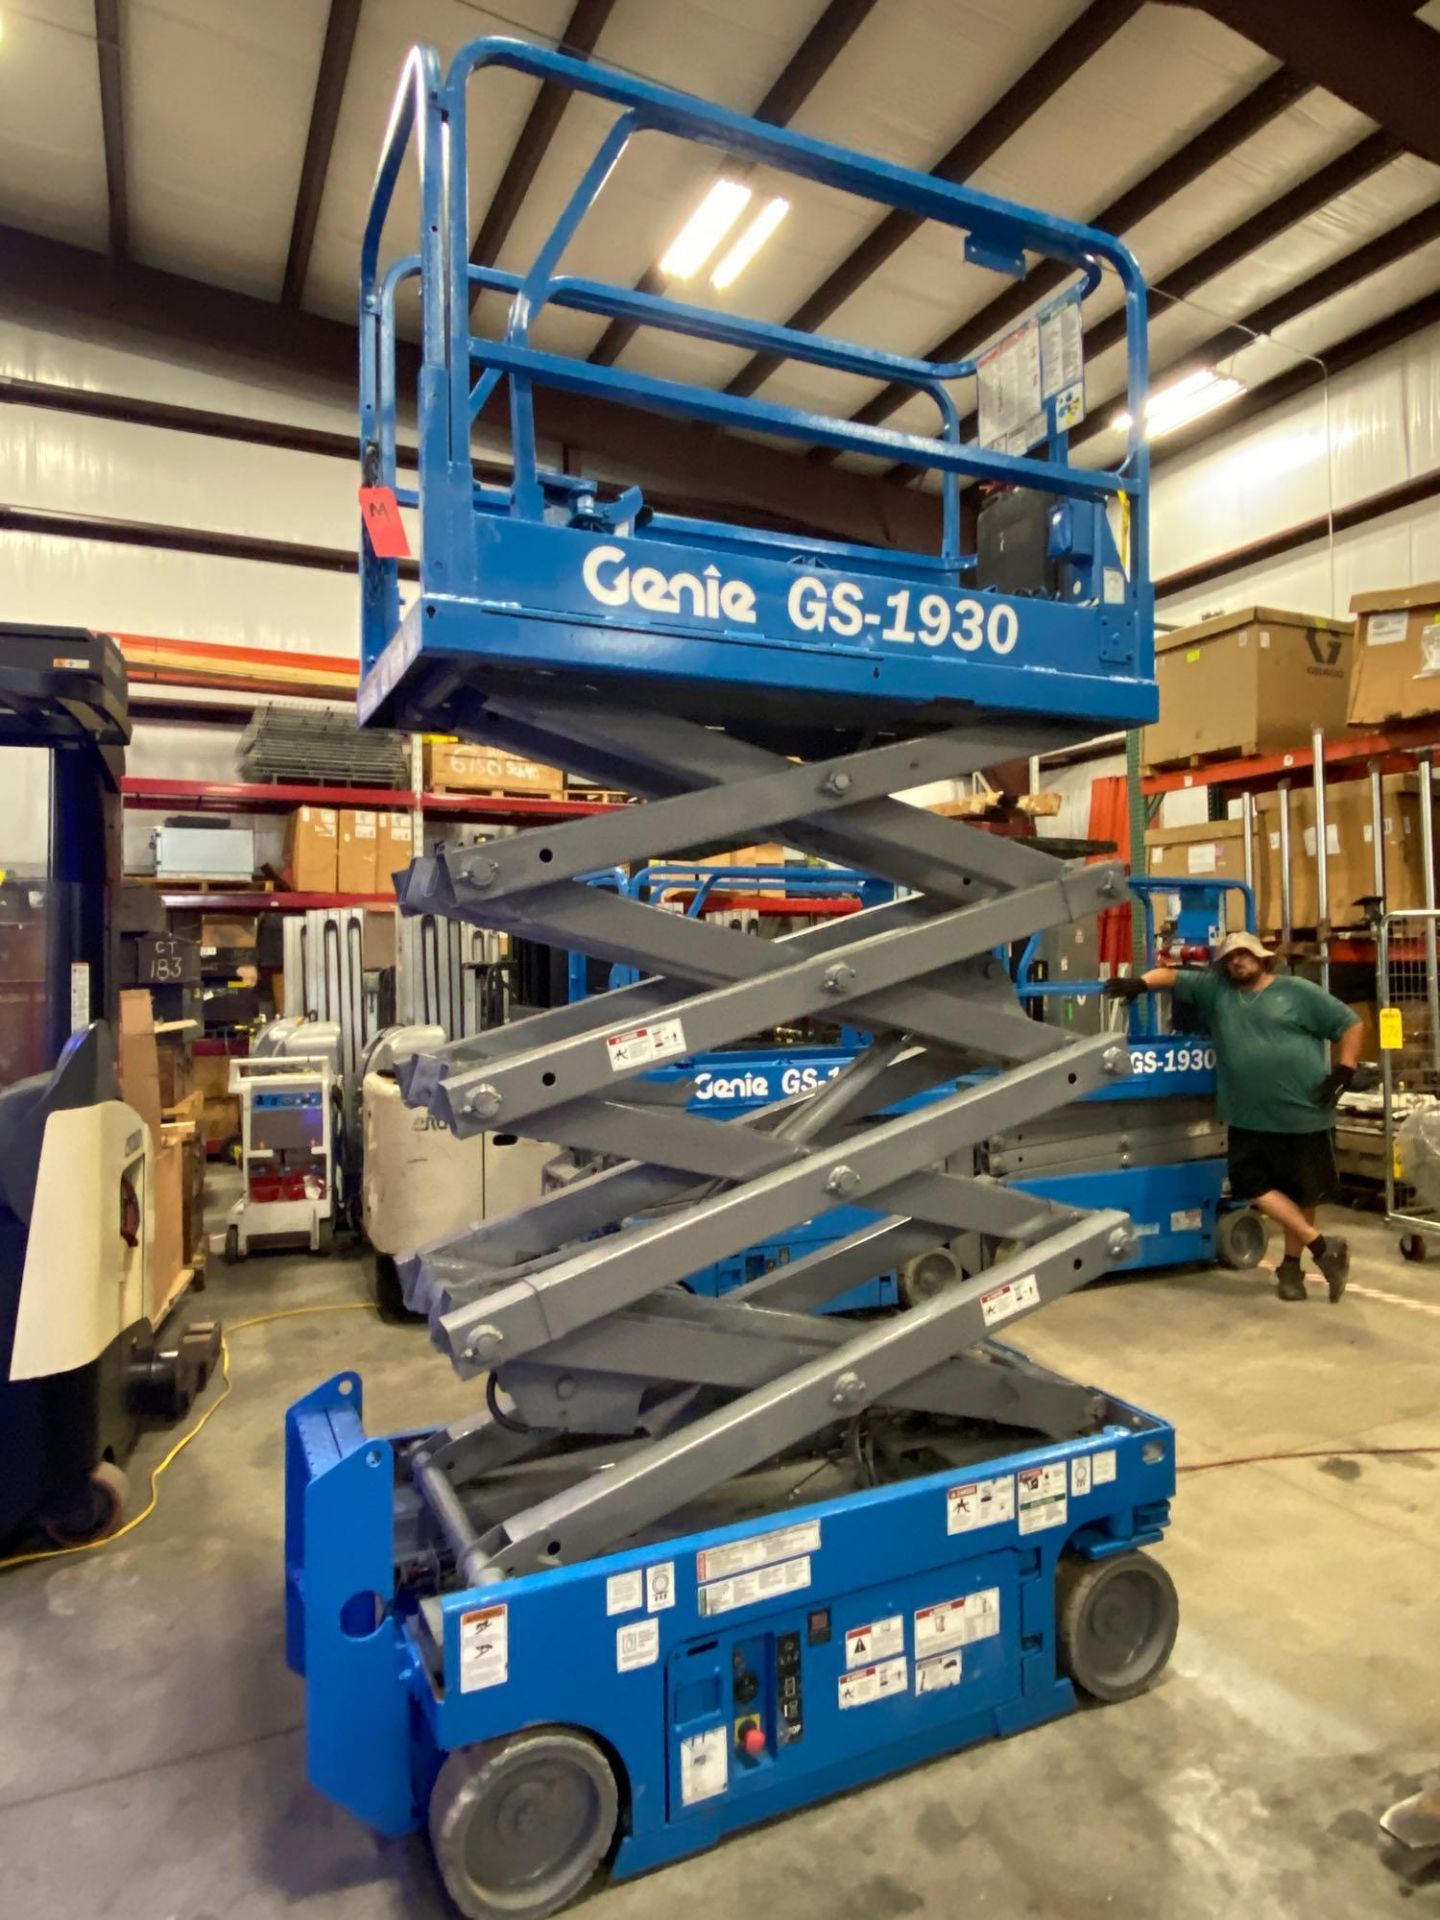 GENIE GS-1930 ELECTRIC SCISSOR LIFT, SELF PROPELLED, 19' PLATFORM HEIGHT, BUILT IN BATTERY CHARGER, - Image 4 of 5